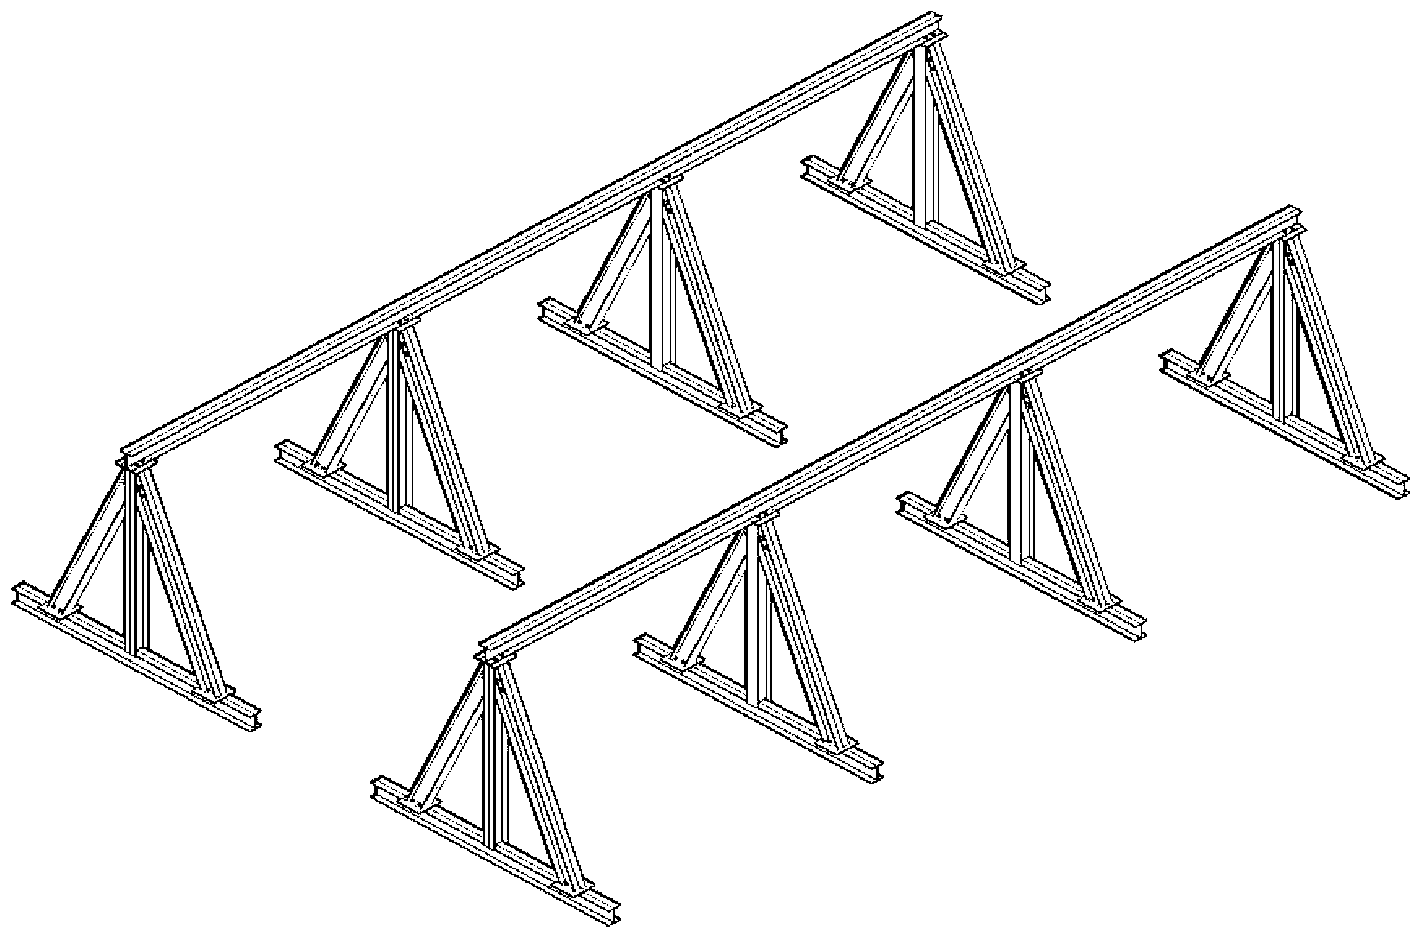 Detachable triangular scaffold and steel truss assembly construction method